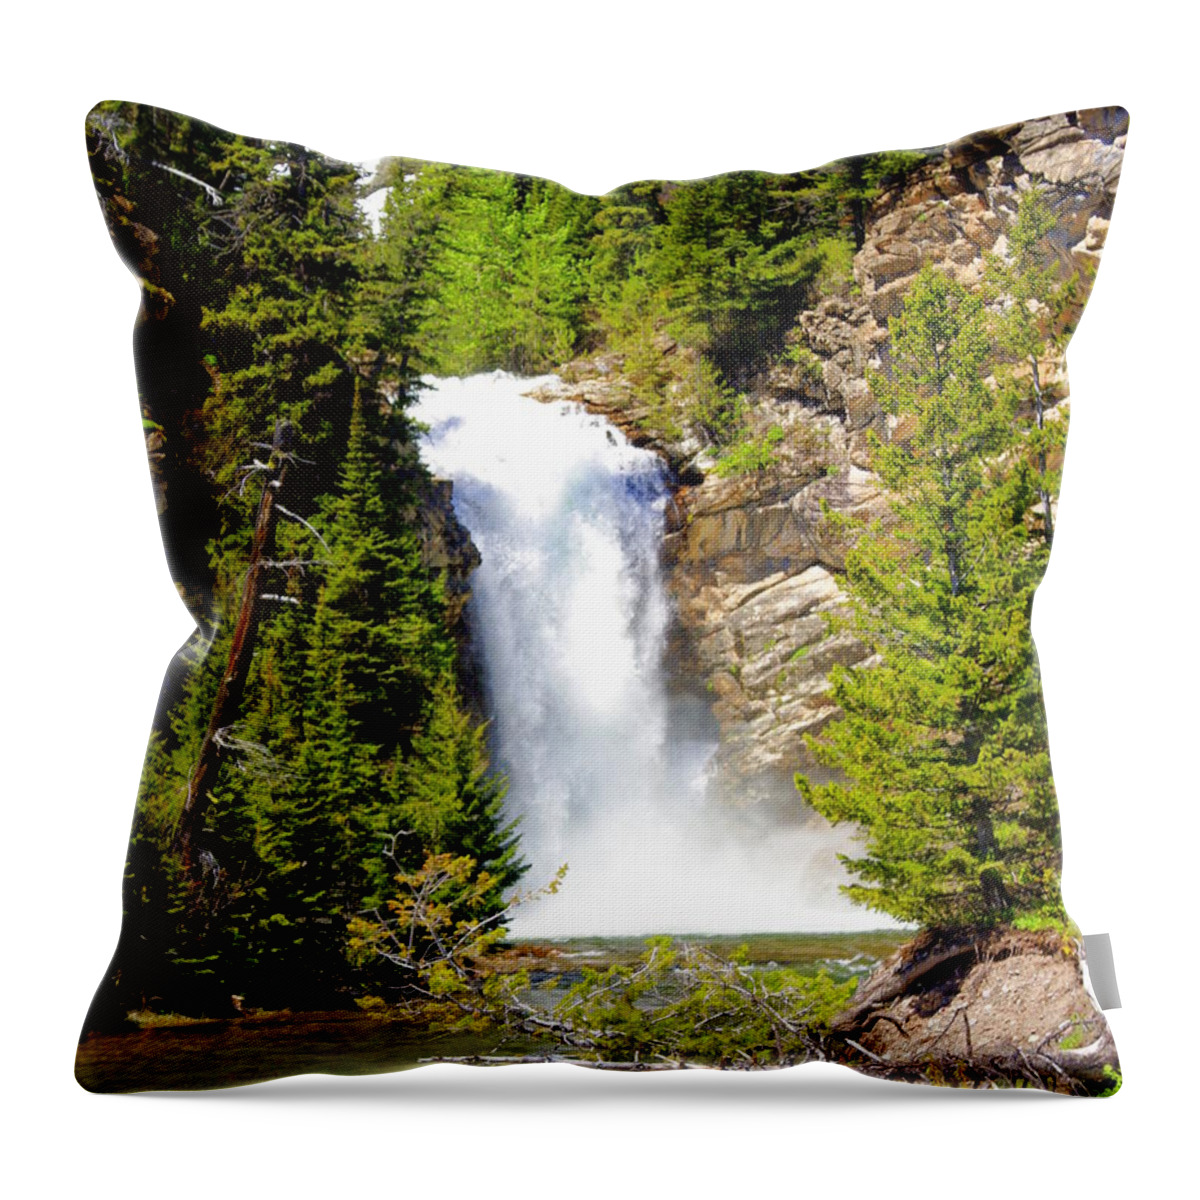 Waterfalls Throw Pillow featuring the photograph Running Eagle Falls by Marty Koch